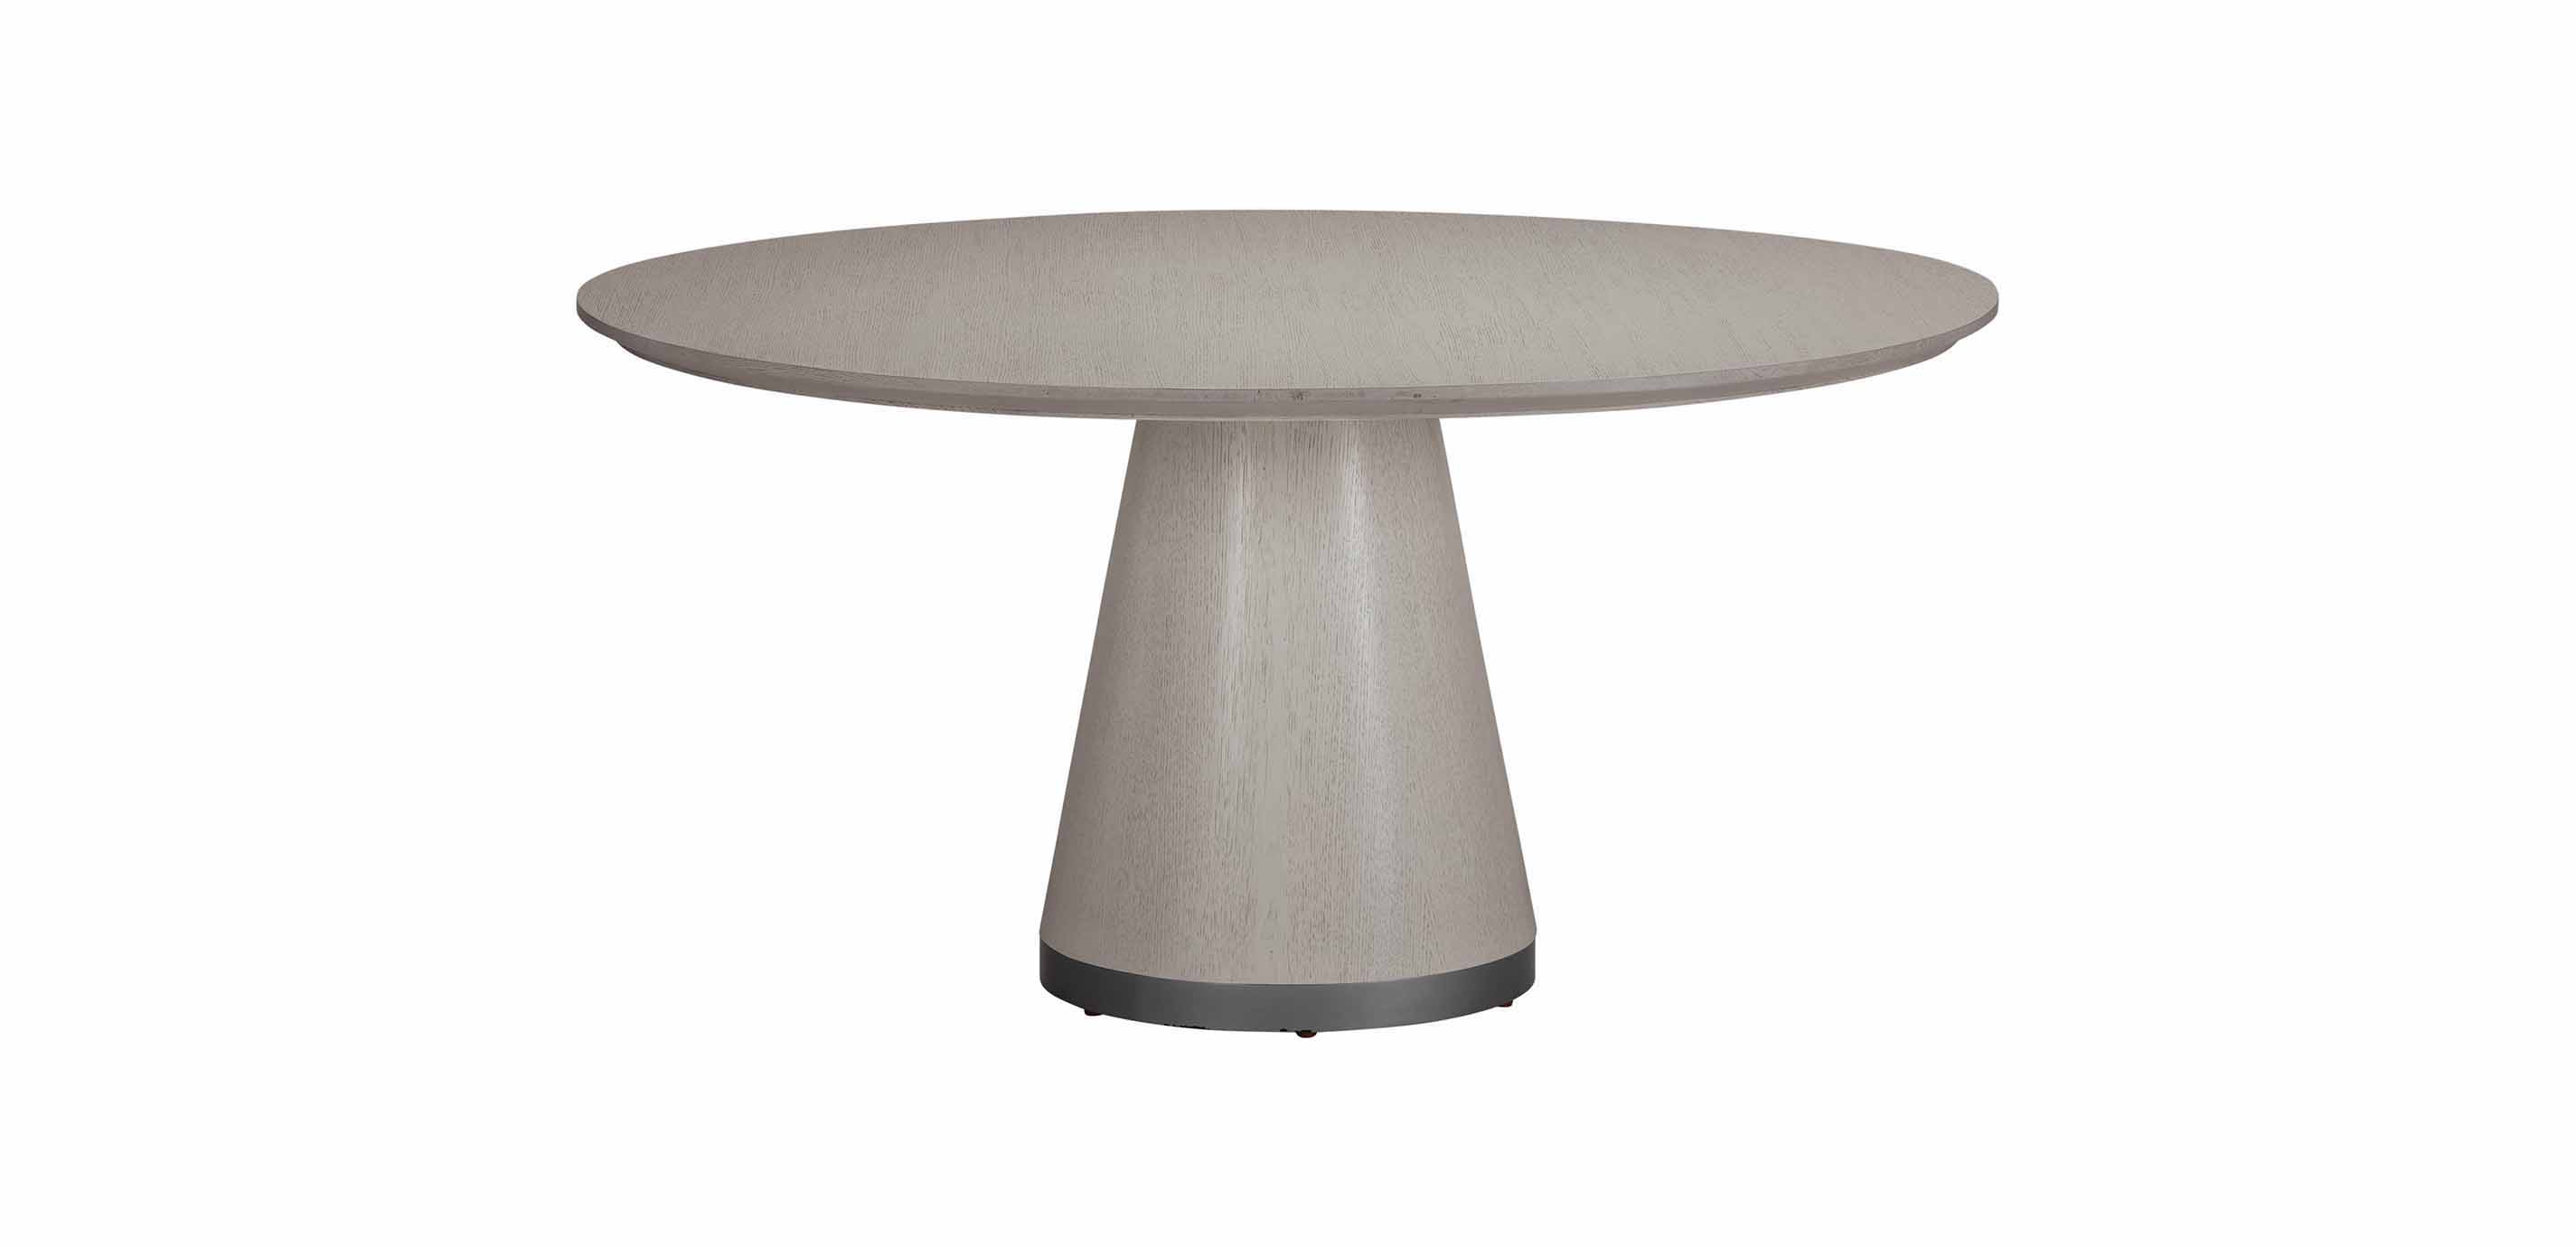 Gracedale Round Dining Table Oak Dining Table Ethan Allen